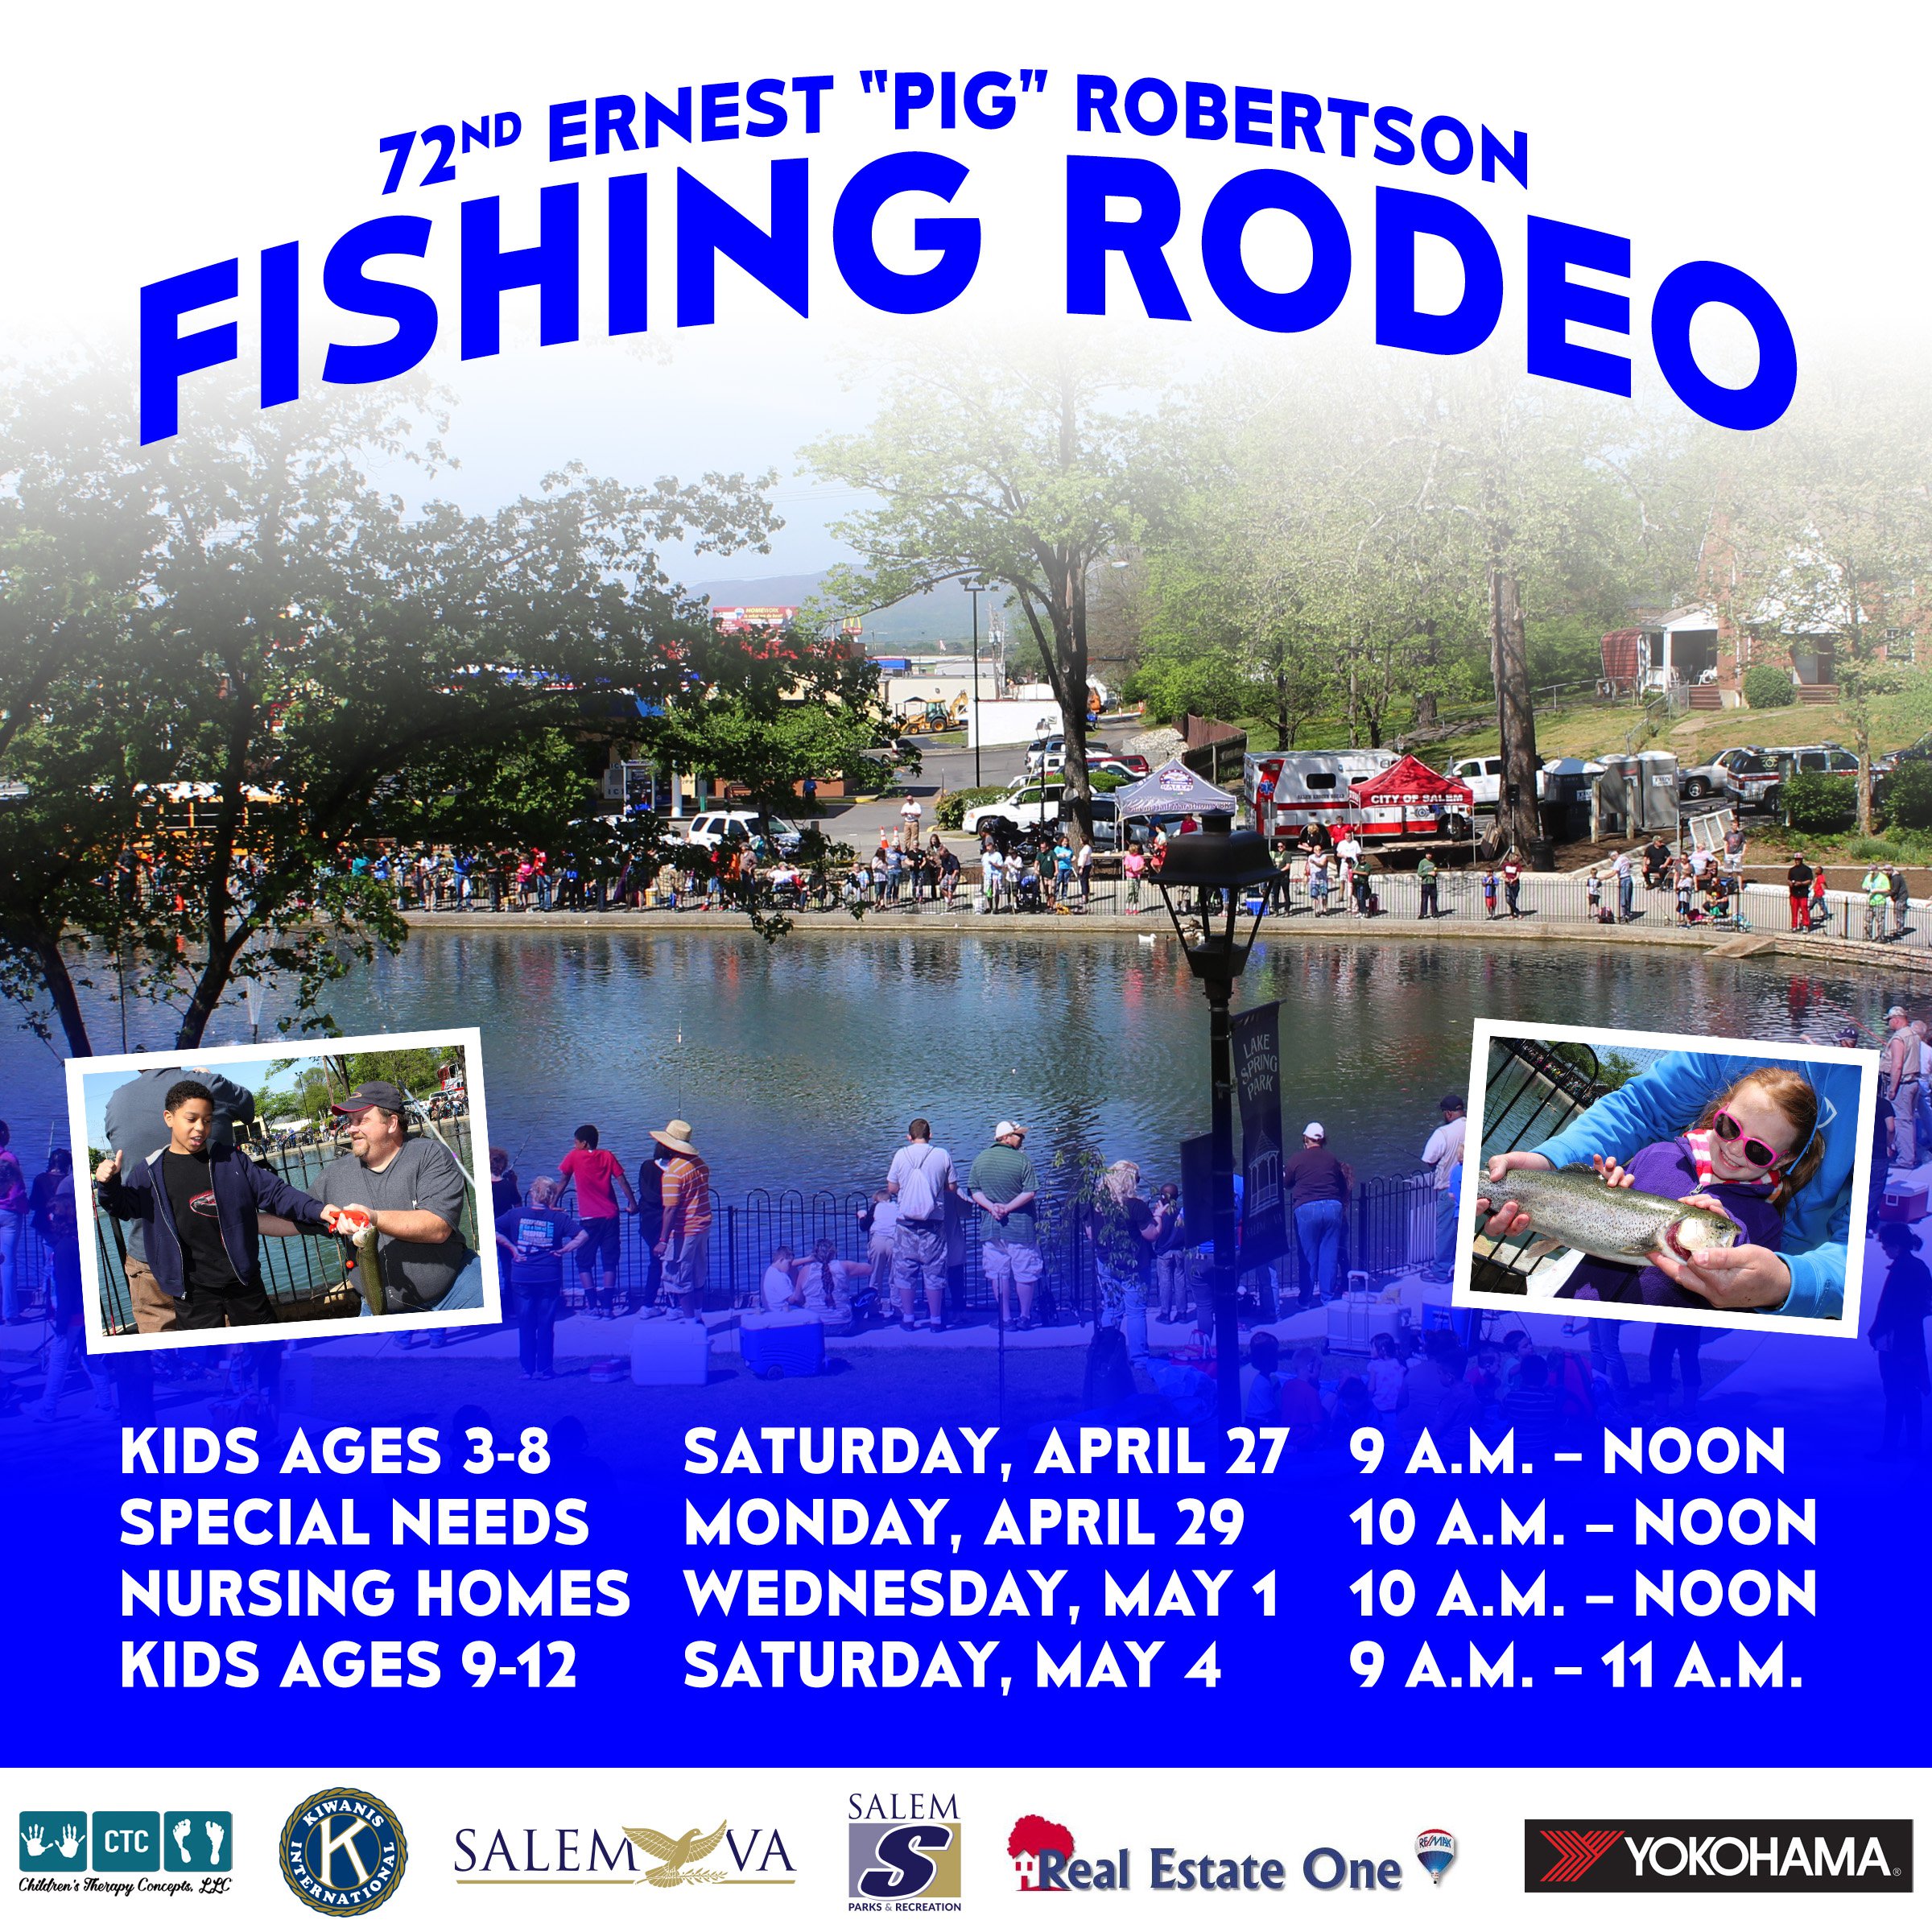 72nd Annual Ernest Pig Robertson Fishing Rodeo (Children 3-8